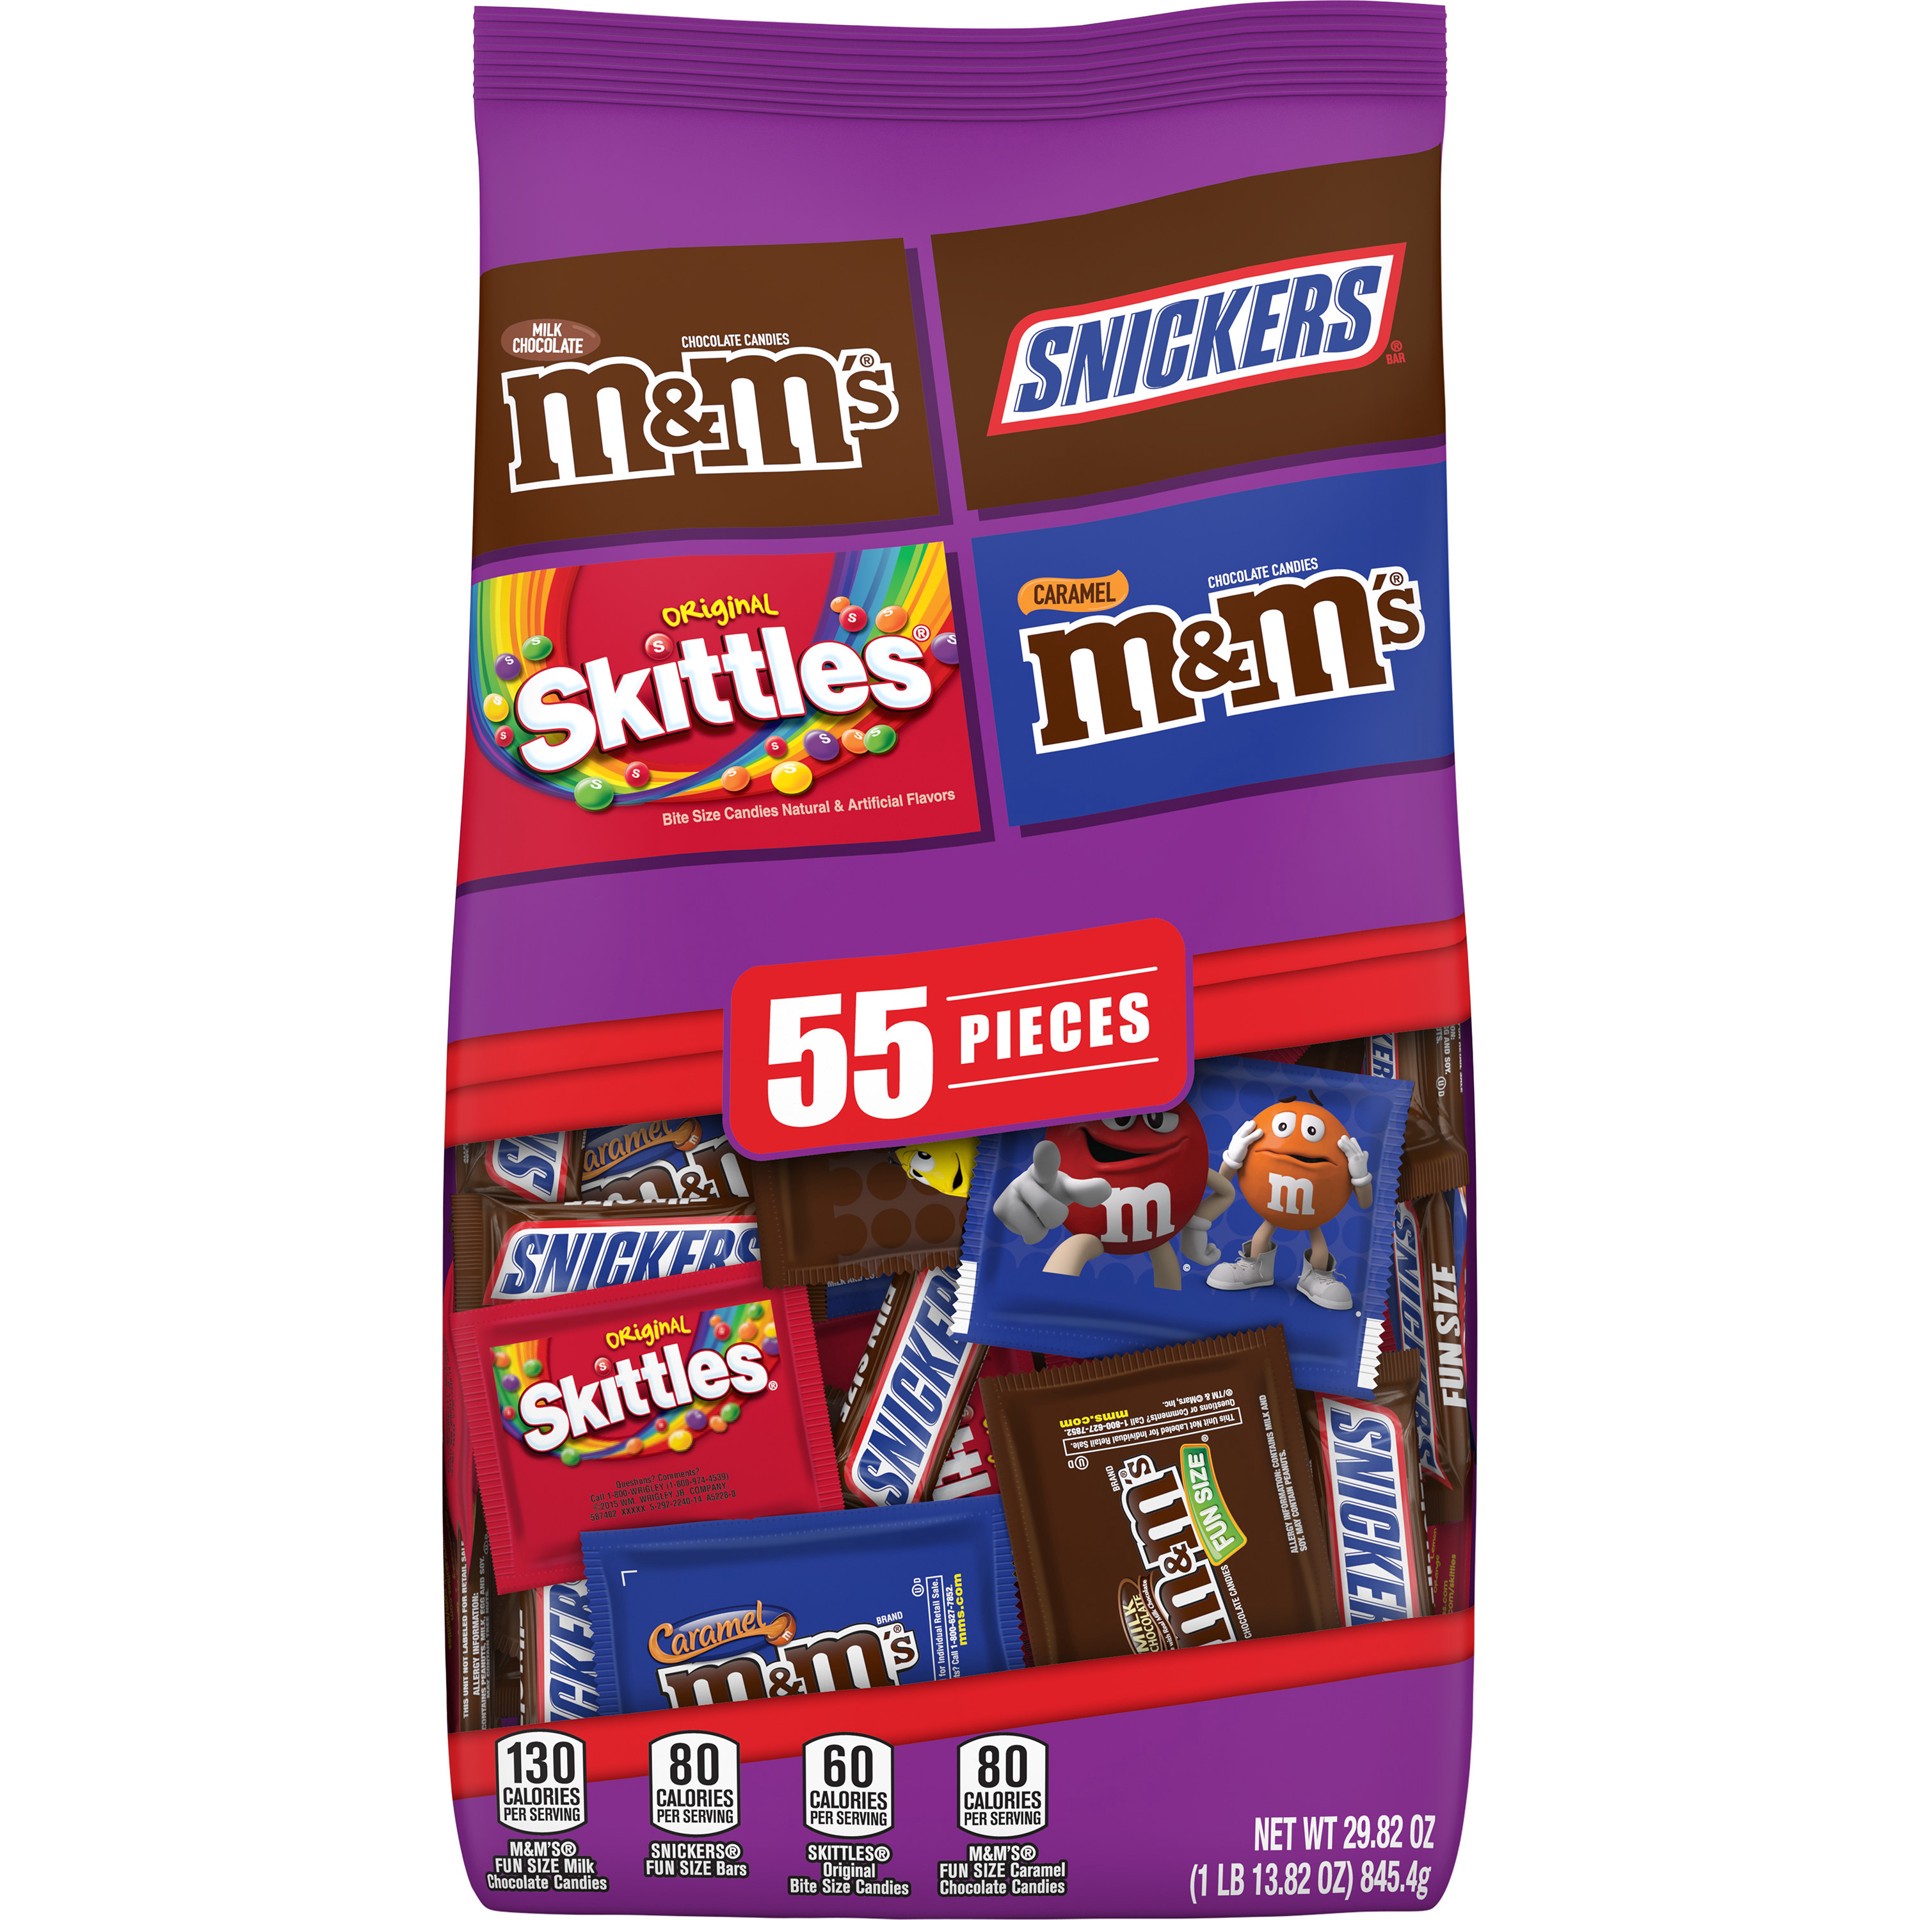 slide 1 of 8, Mixed M&M'S, SNICKERS, SKITTLES Variety Pack Fun Size Chewy Candy Assortment, 55 Piece Bag, 55 ct